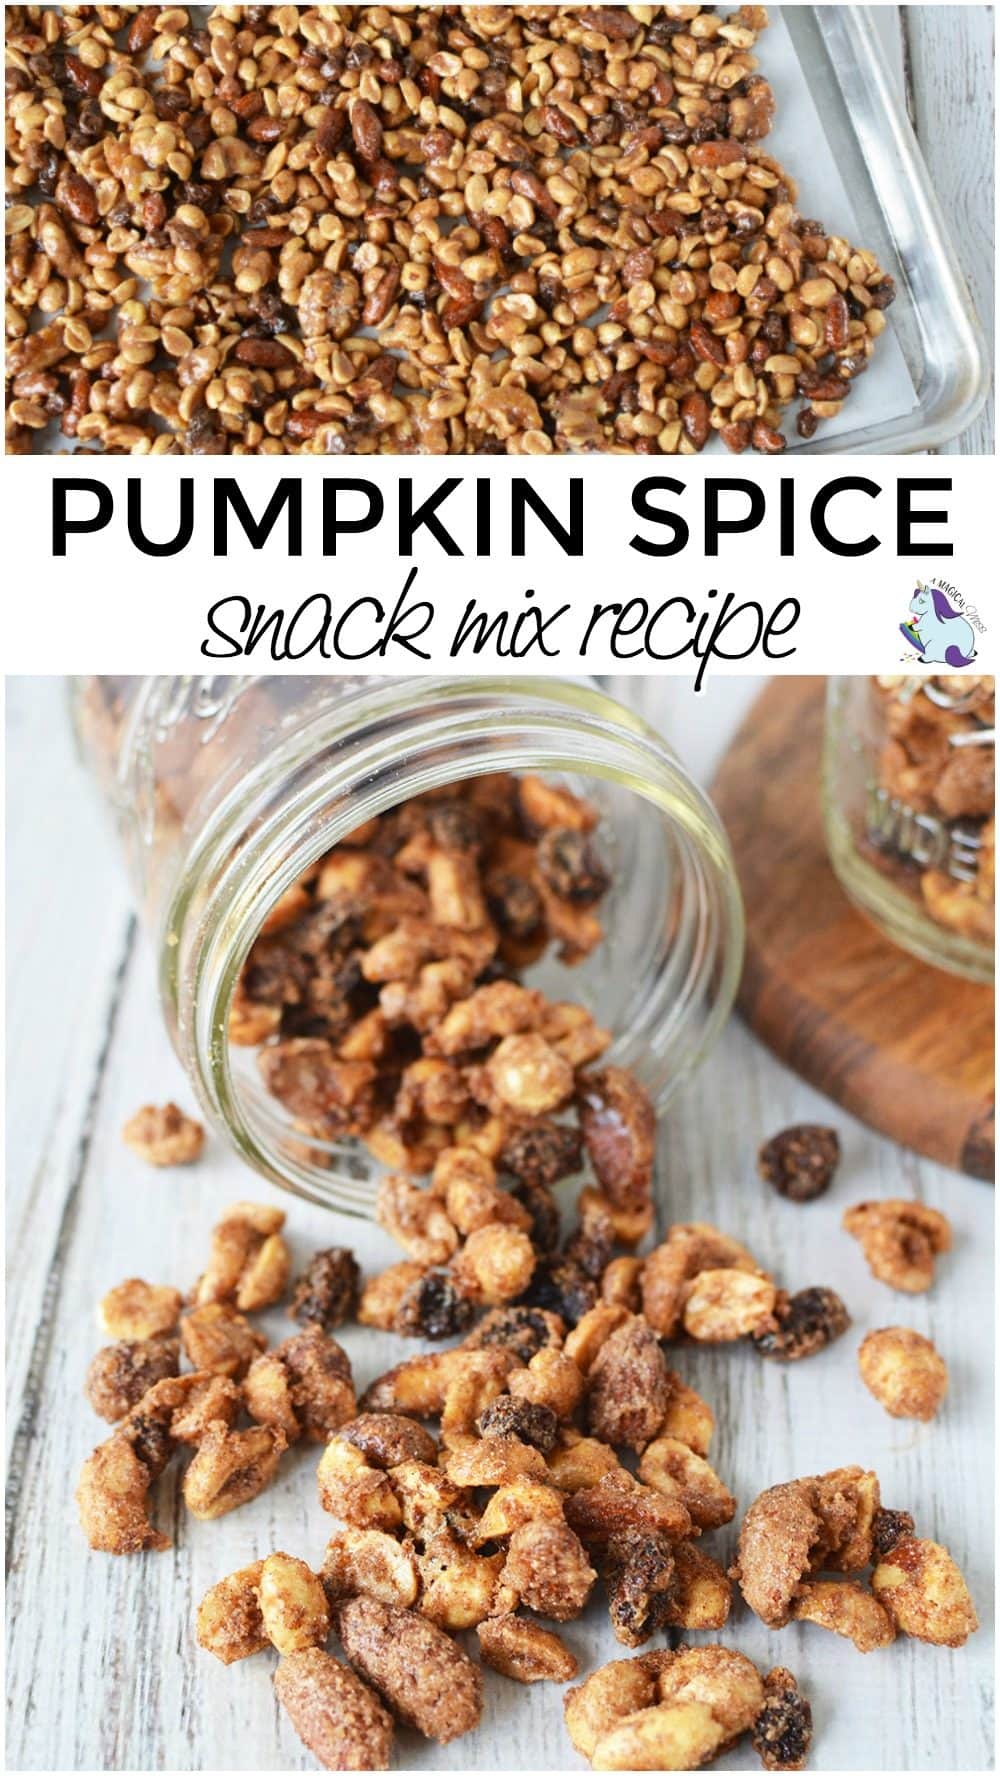 Pumpkin Spice Sweet and Salty Snack Mix Recipe